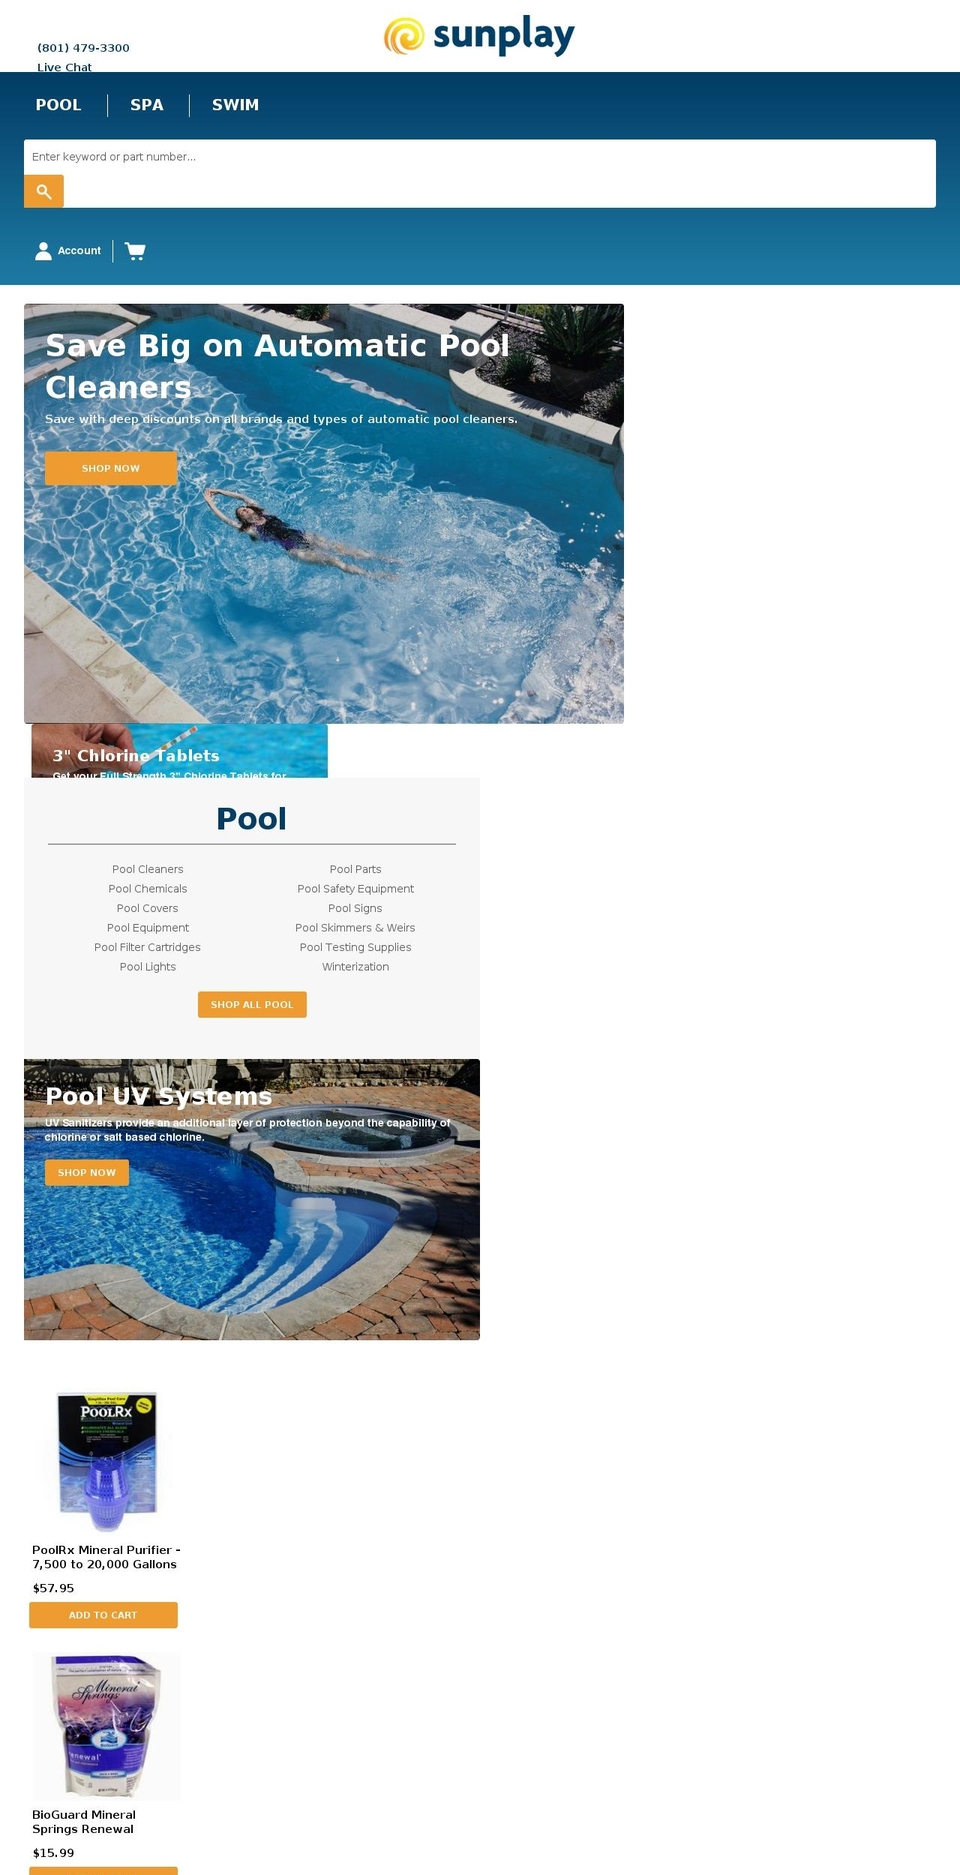 Sunplay v1.0 [Speck - Collection] Shopify theme site example sunplay.photos